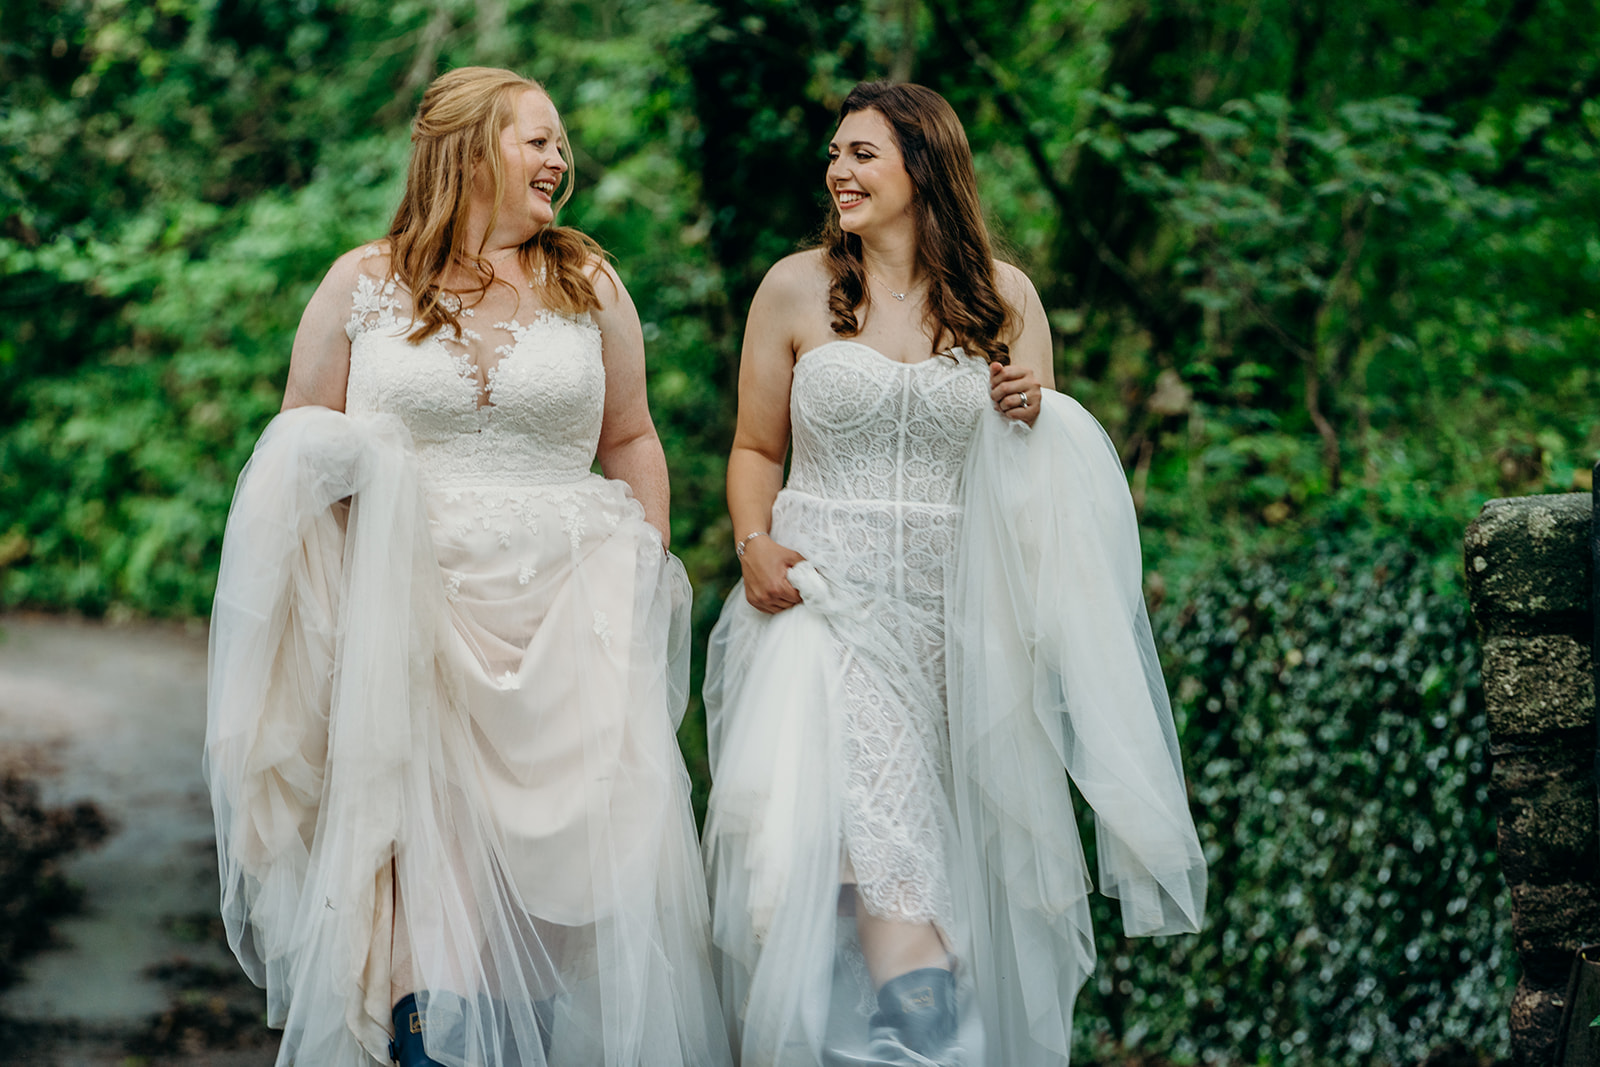 two brides with long hair walking down a Devon lane holding up their dress skirts